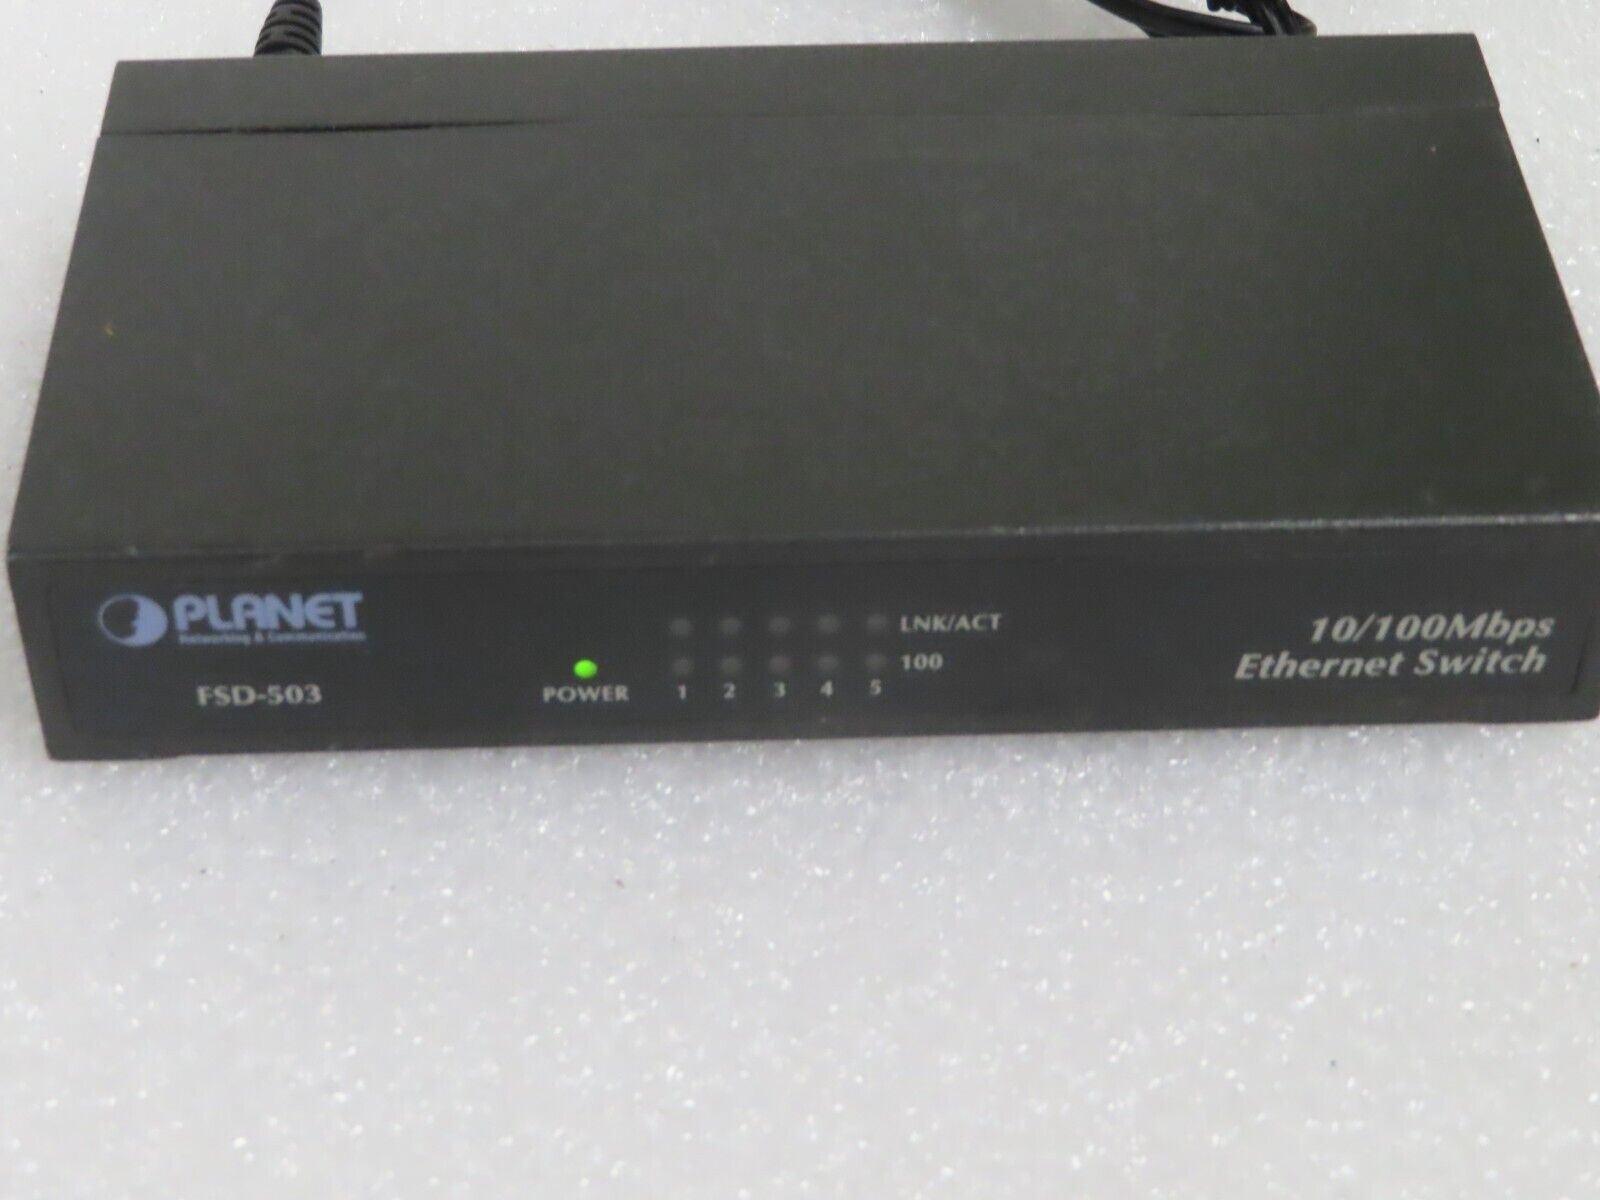 Planet Networking Communication 5-Port FSD-503 Ethernet Switch * no adapter *